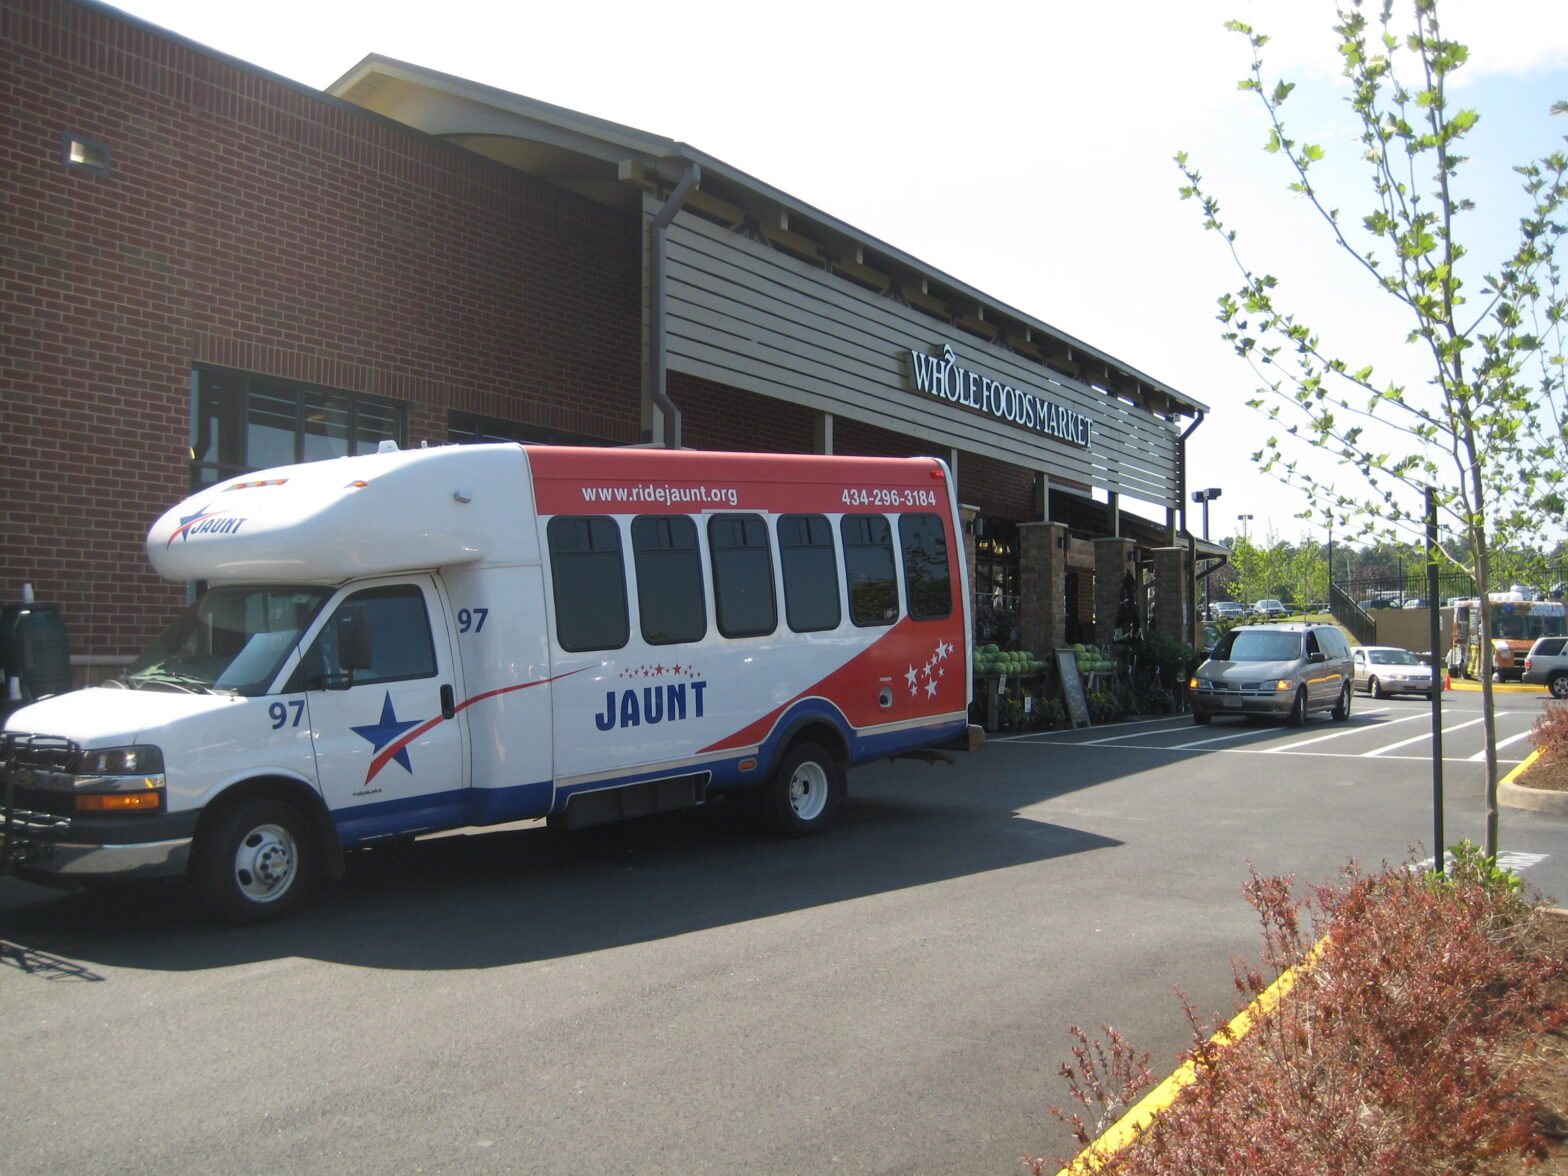 A JAUNT bus in front of a grocery store, a church with handicap parking, and a ramp leading to the Pavilion